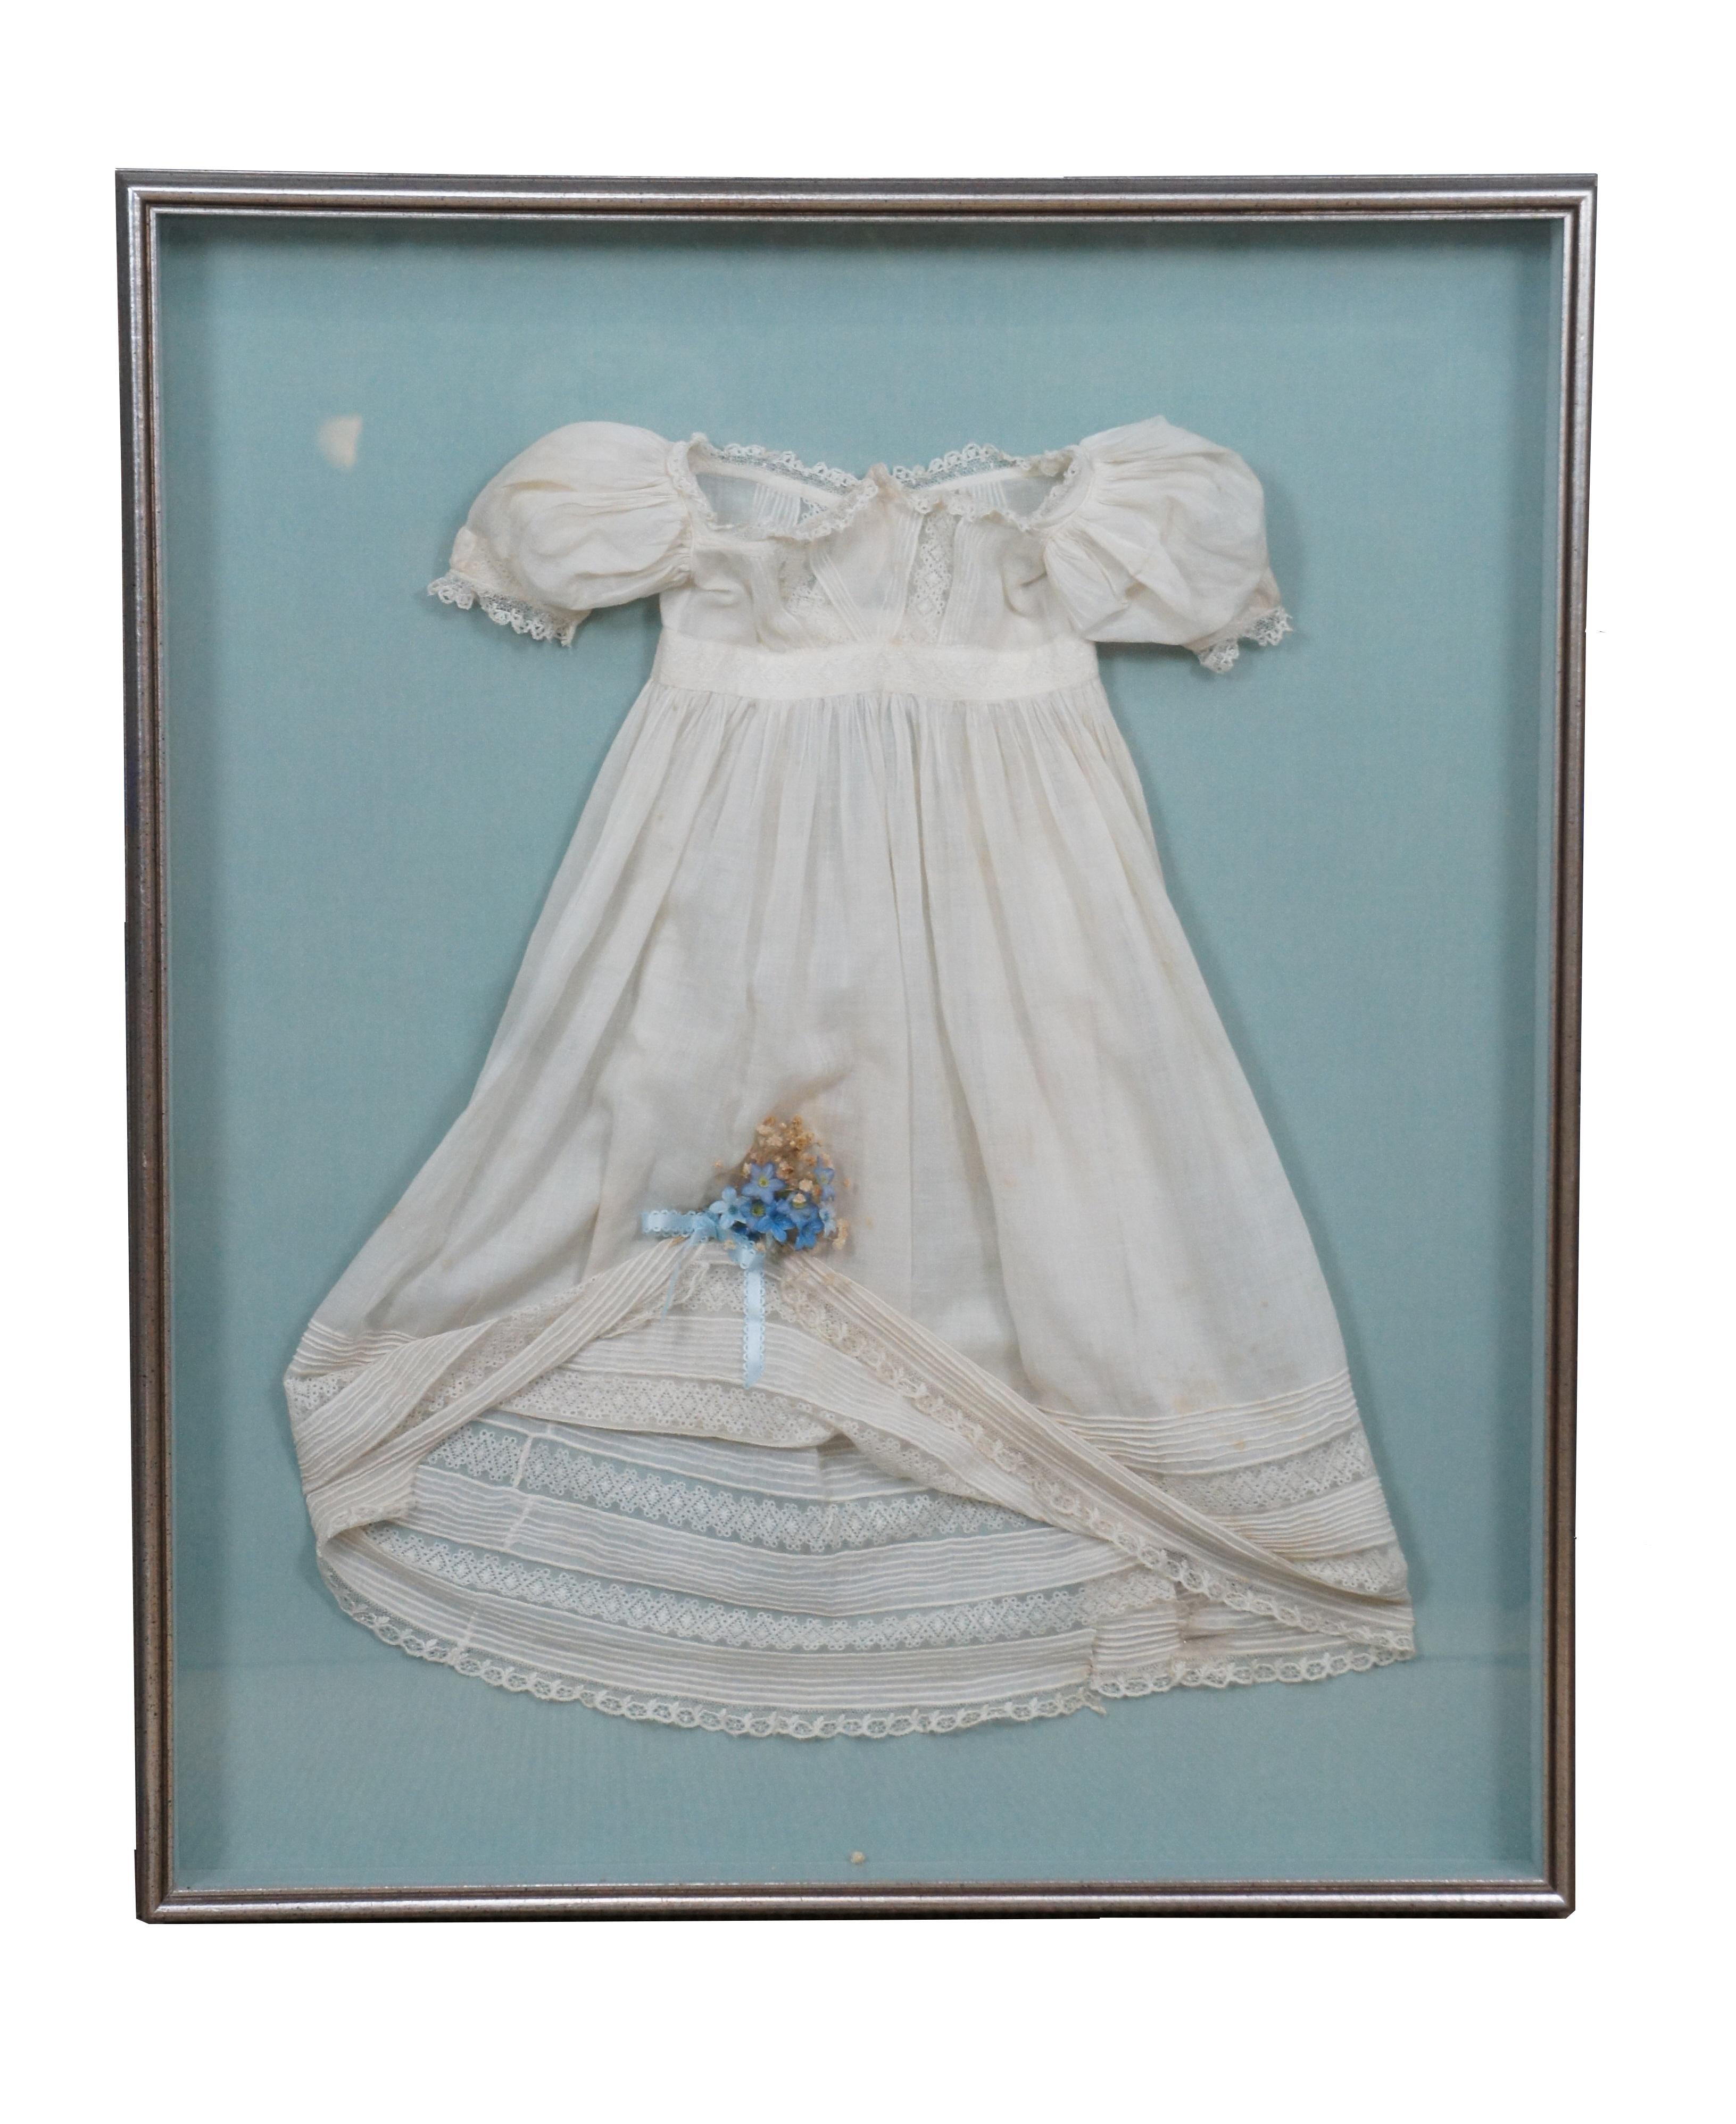 Antique 19th Century Infant Christening Gown Lace Baby Dress Shadowbox